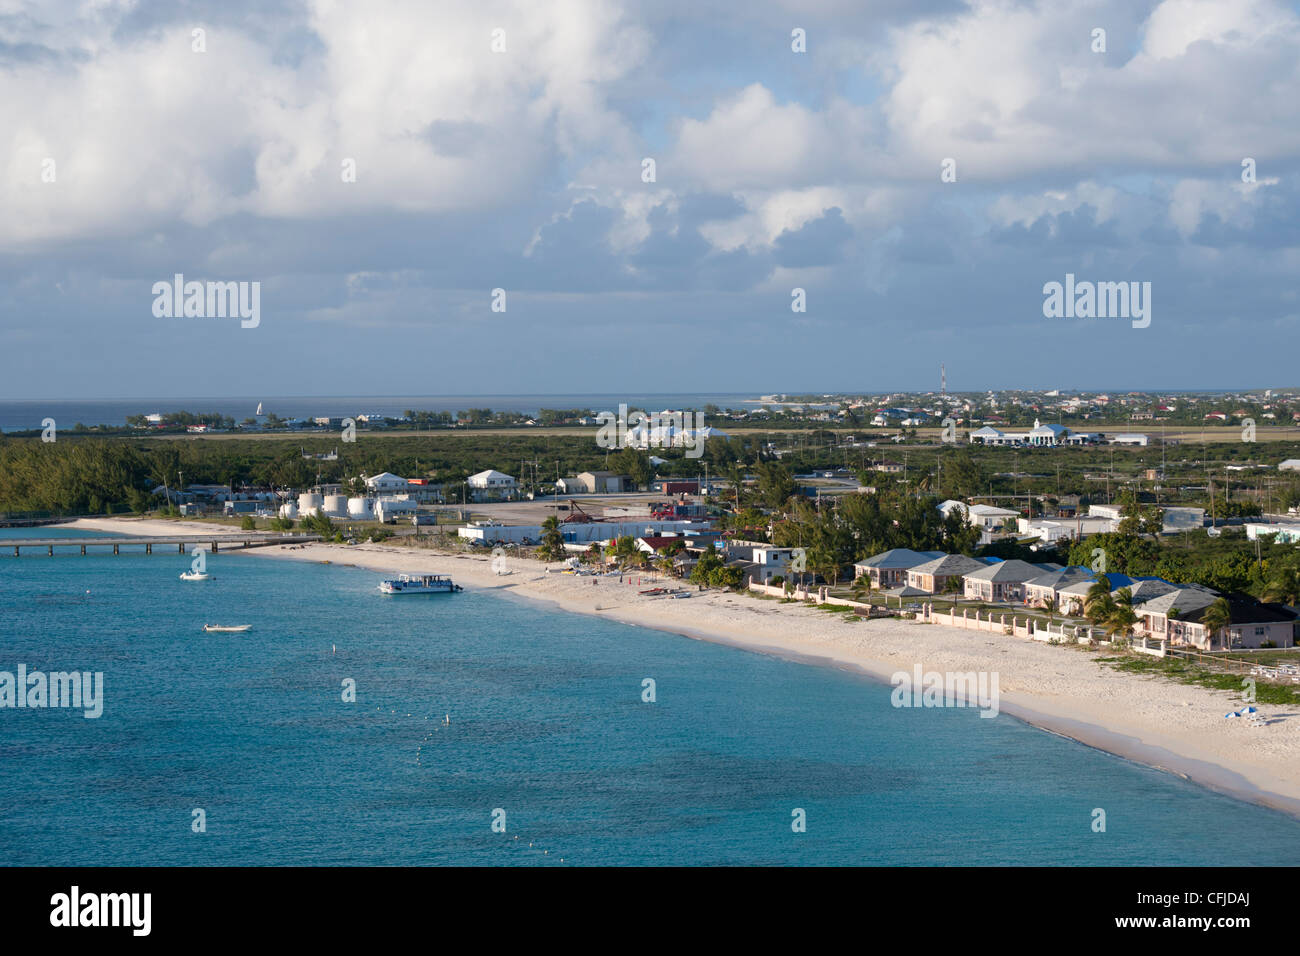 The coastline of Grand Turk bathed in evening light, Turks and Caicos Islands, The West Indies Stock Photo